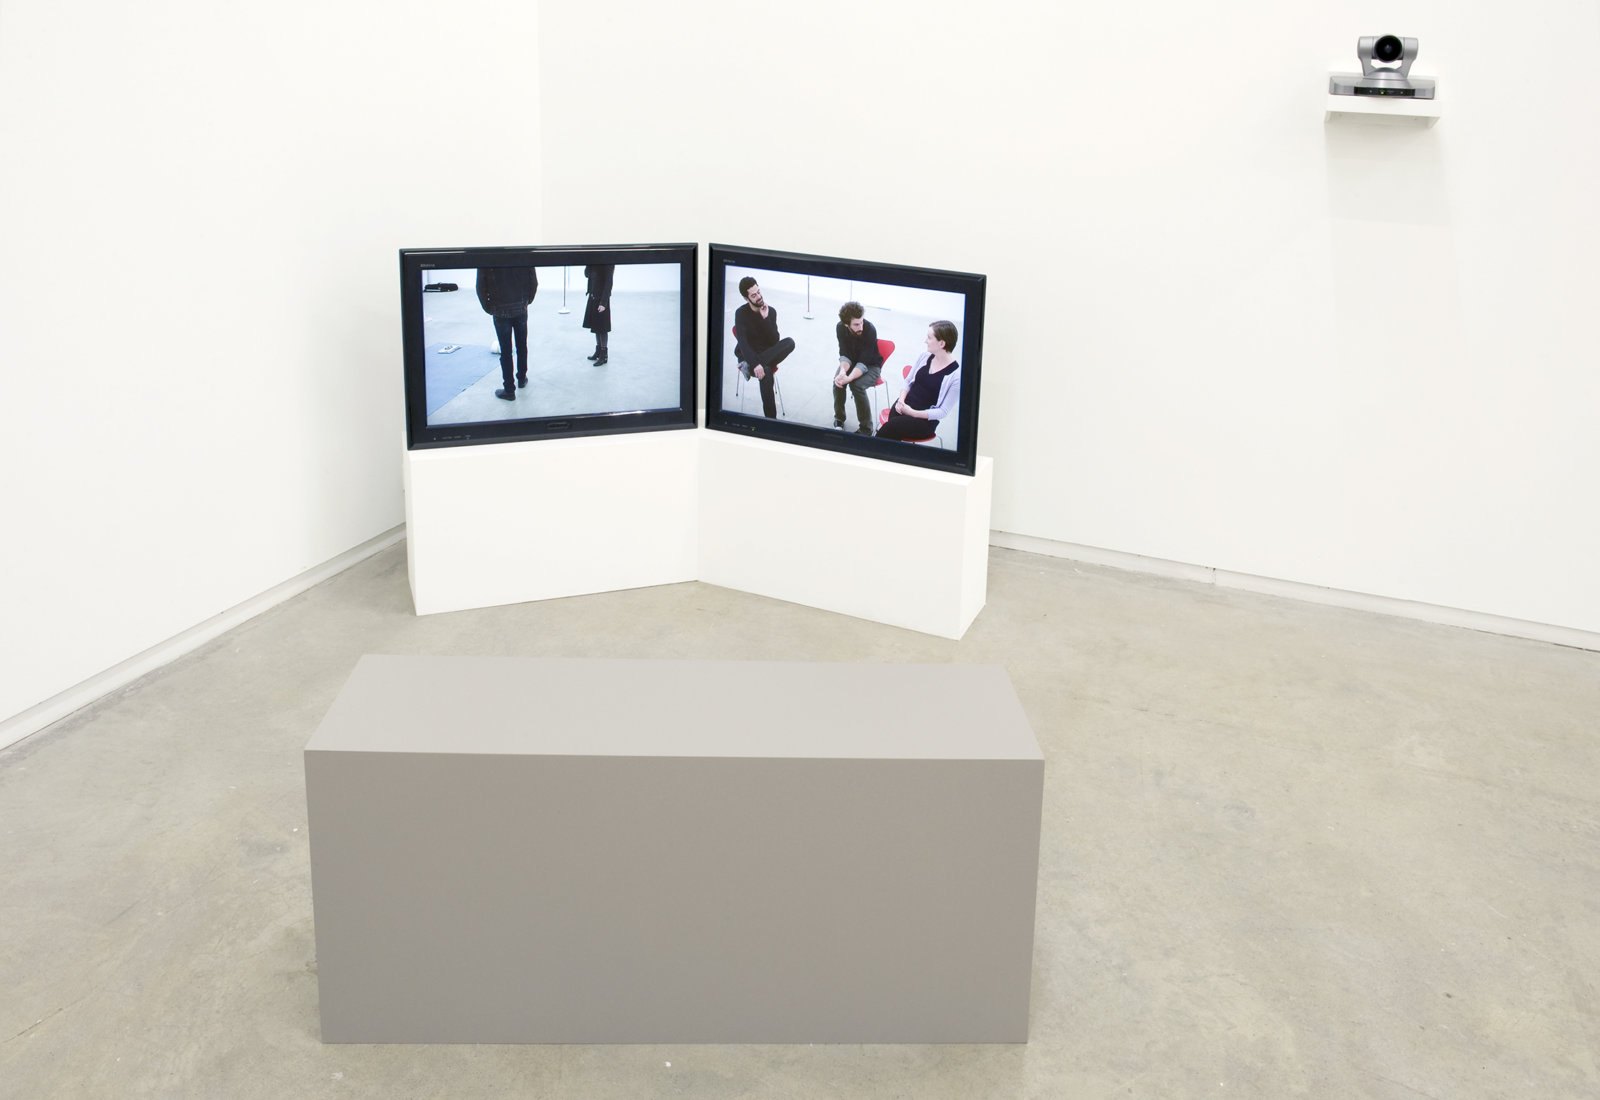 Judy Radul, Clients and Workers, 2011, live and pre-recorded video, objects, tape, painted copper and aluminum, dimensions variable